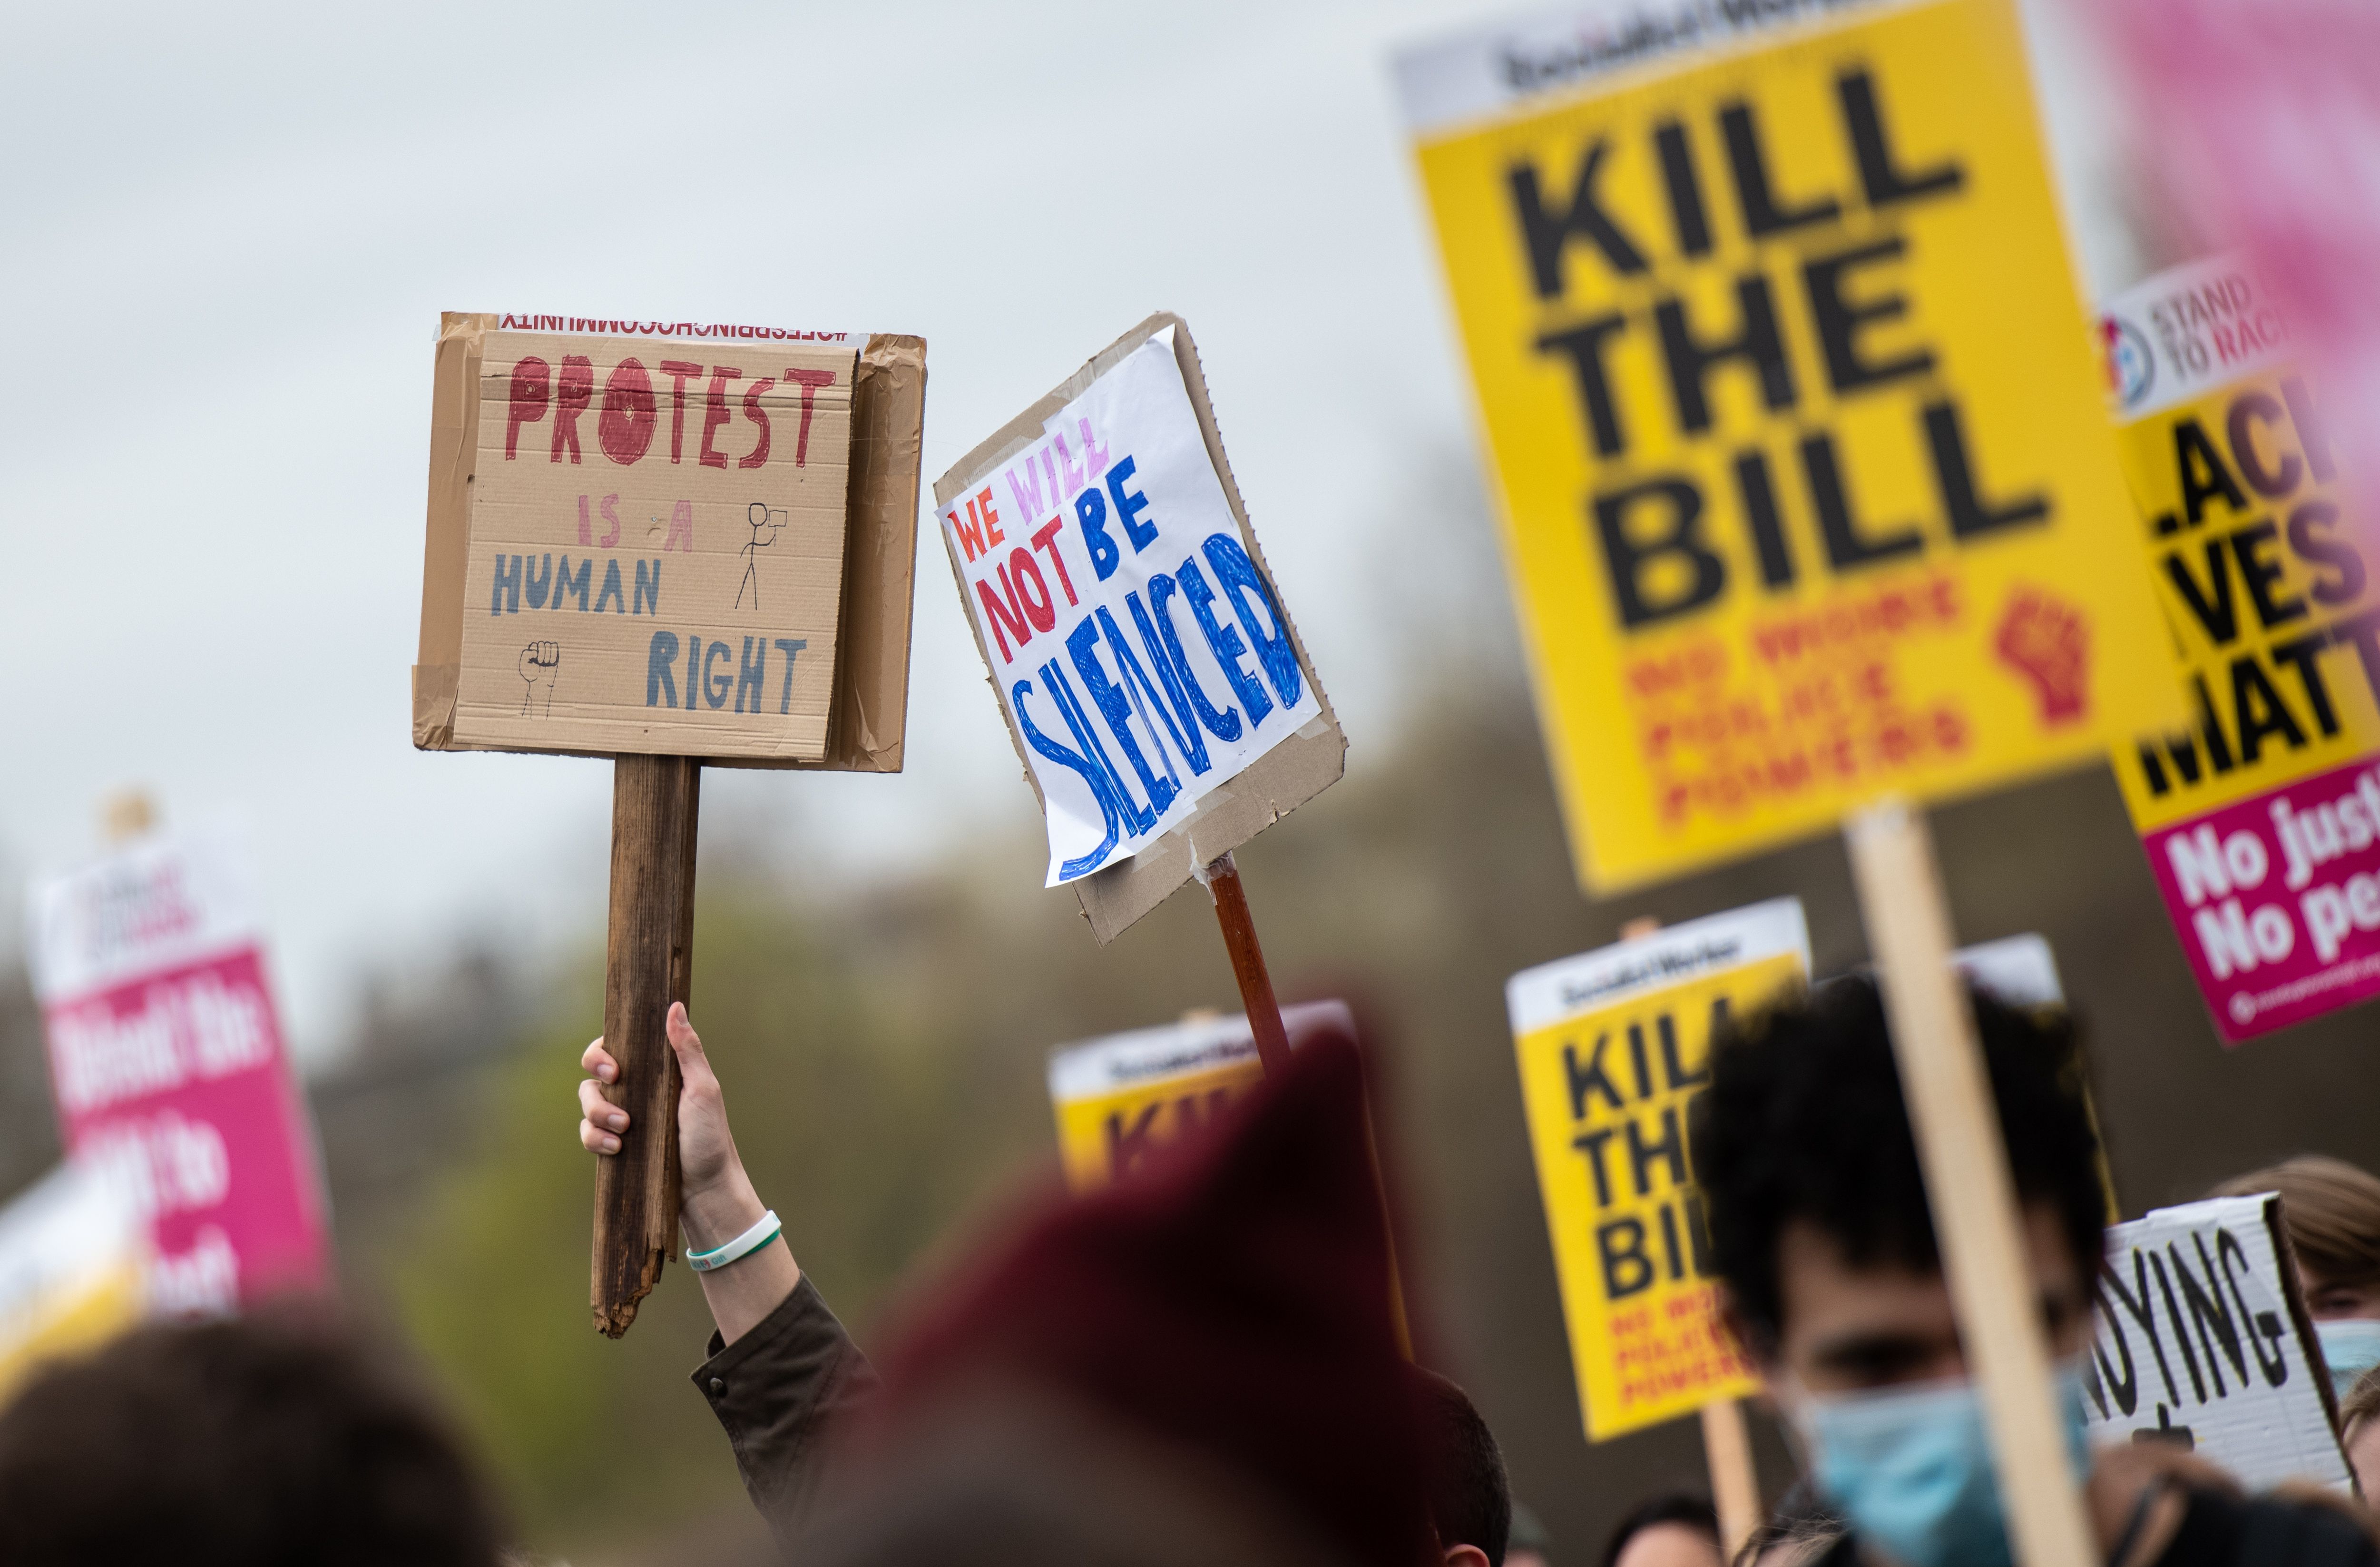 Signs at the protest in London on April 3.